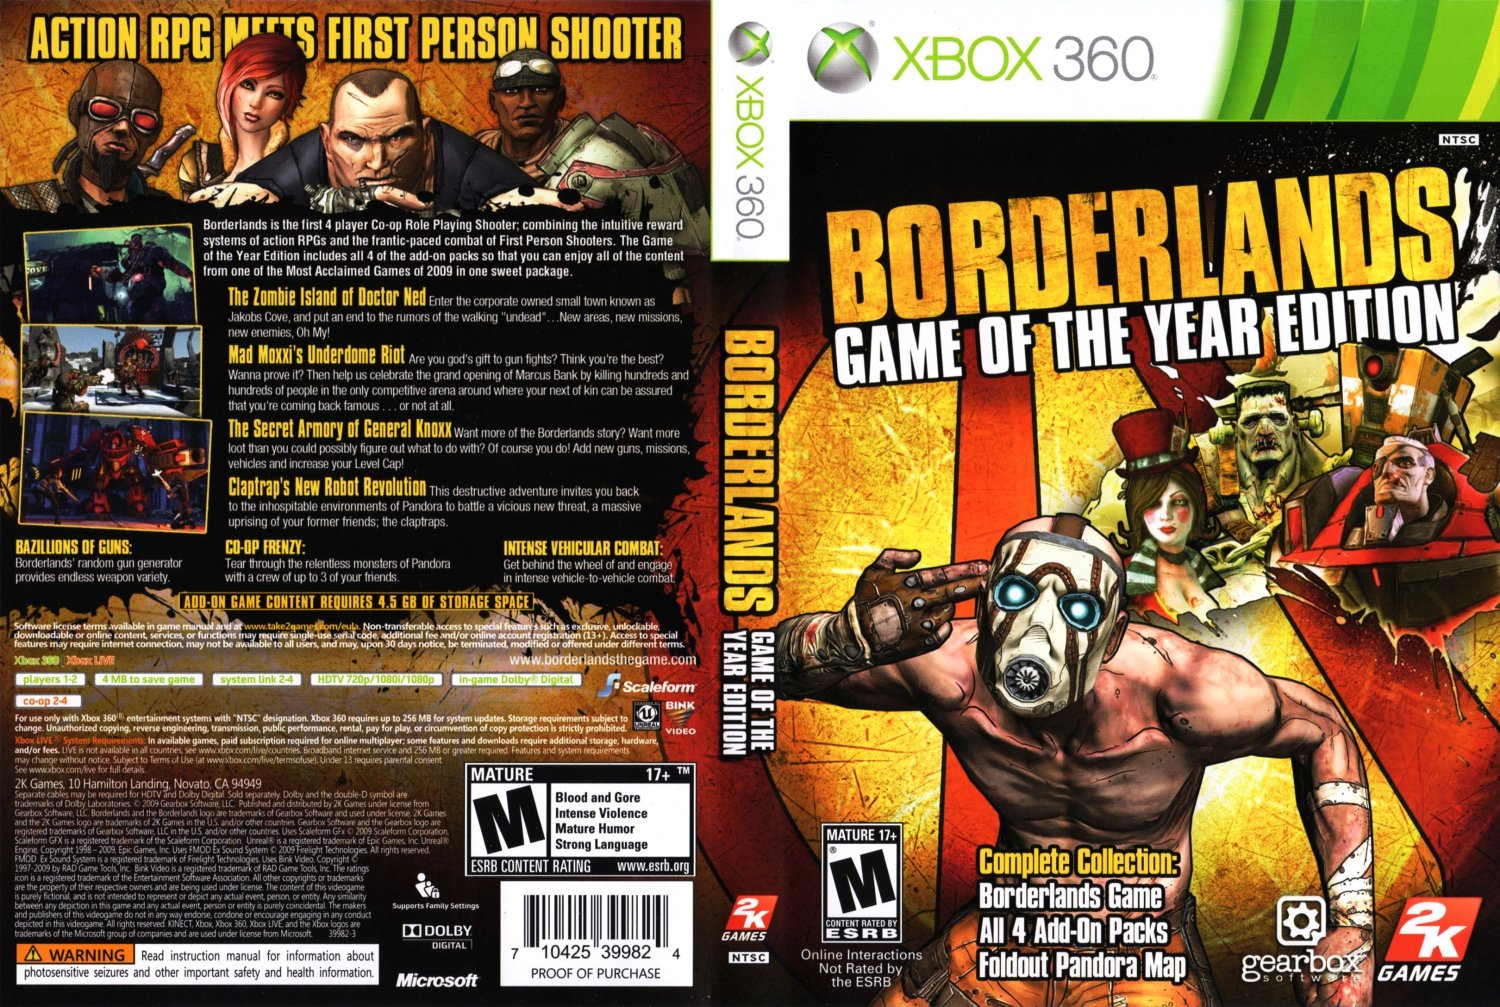 Borderlands_Game_of_the_Year_Edition_DVD_NTSC_f.jpg